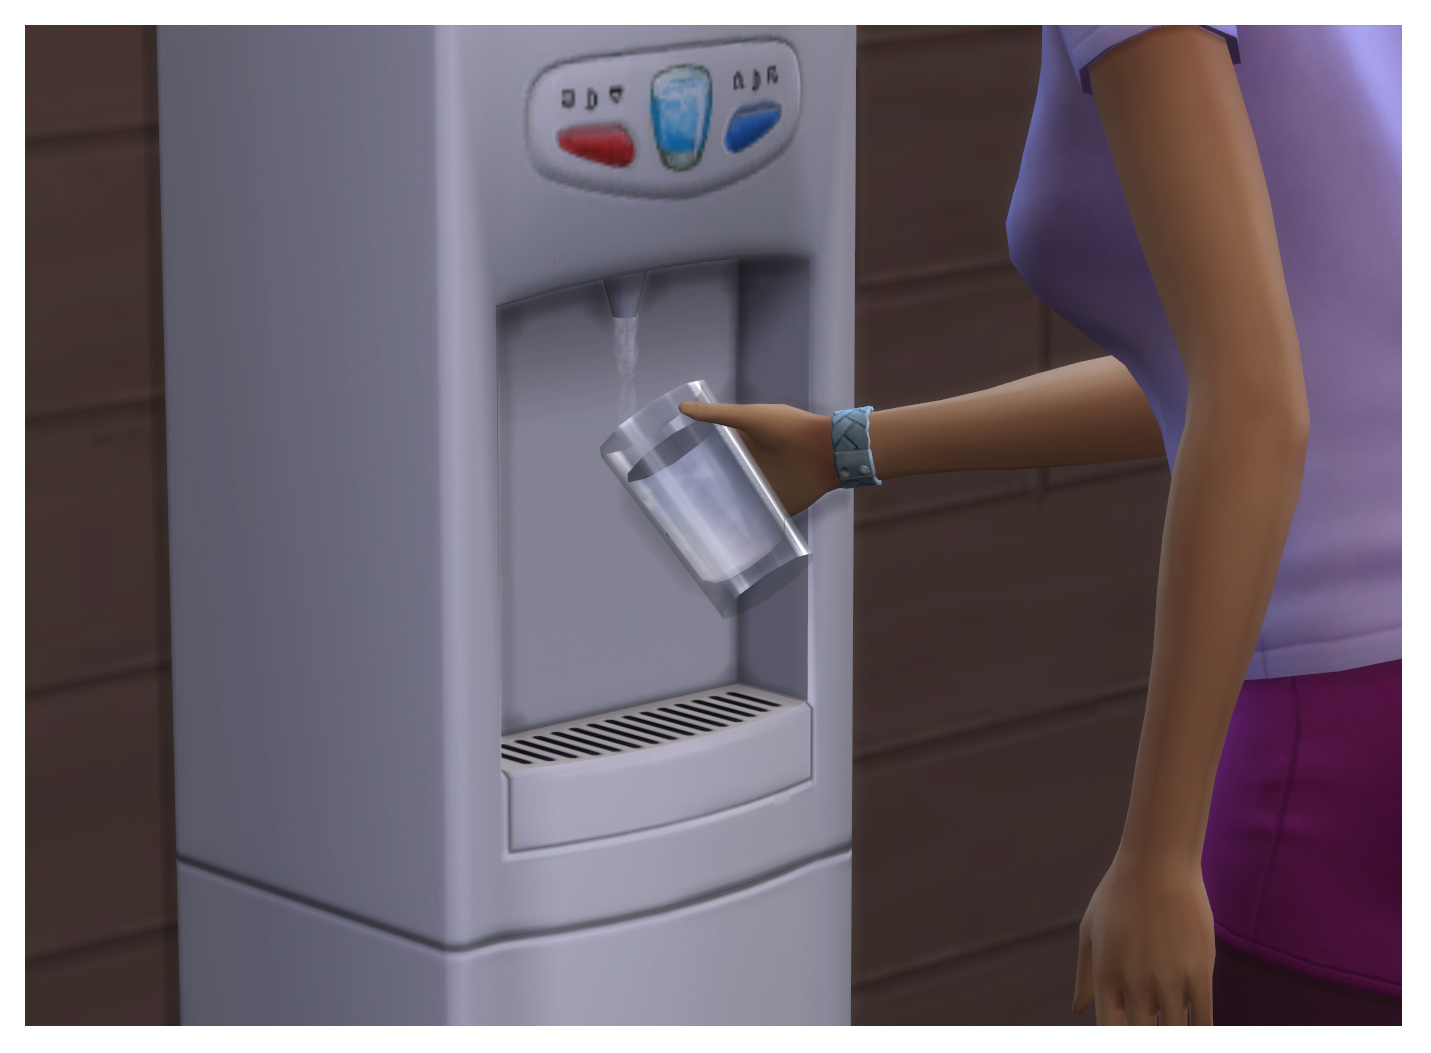 The Sims 4 Functional Water Cooler Játékteszt The Sims Hungary